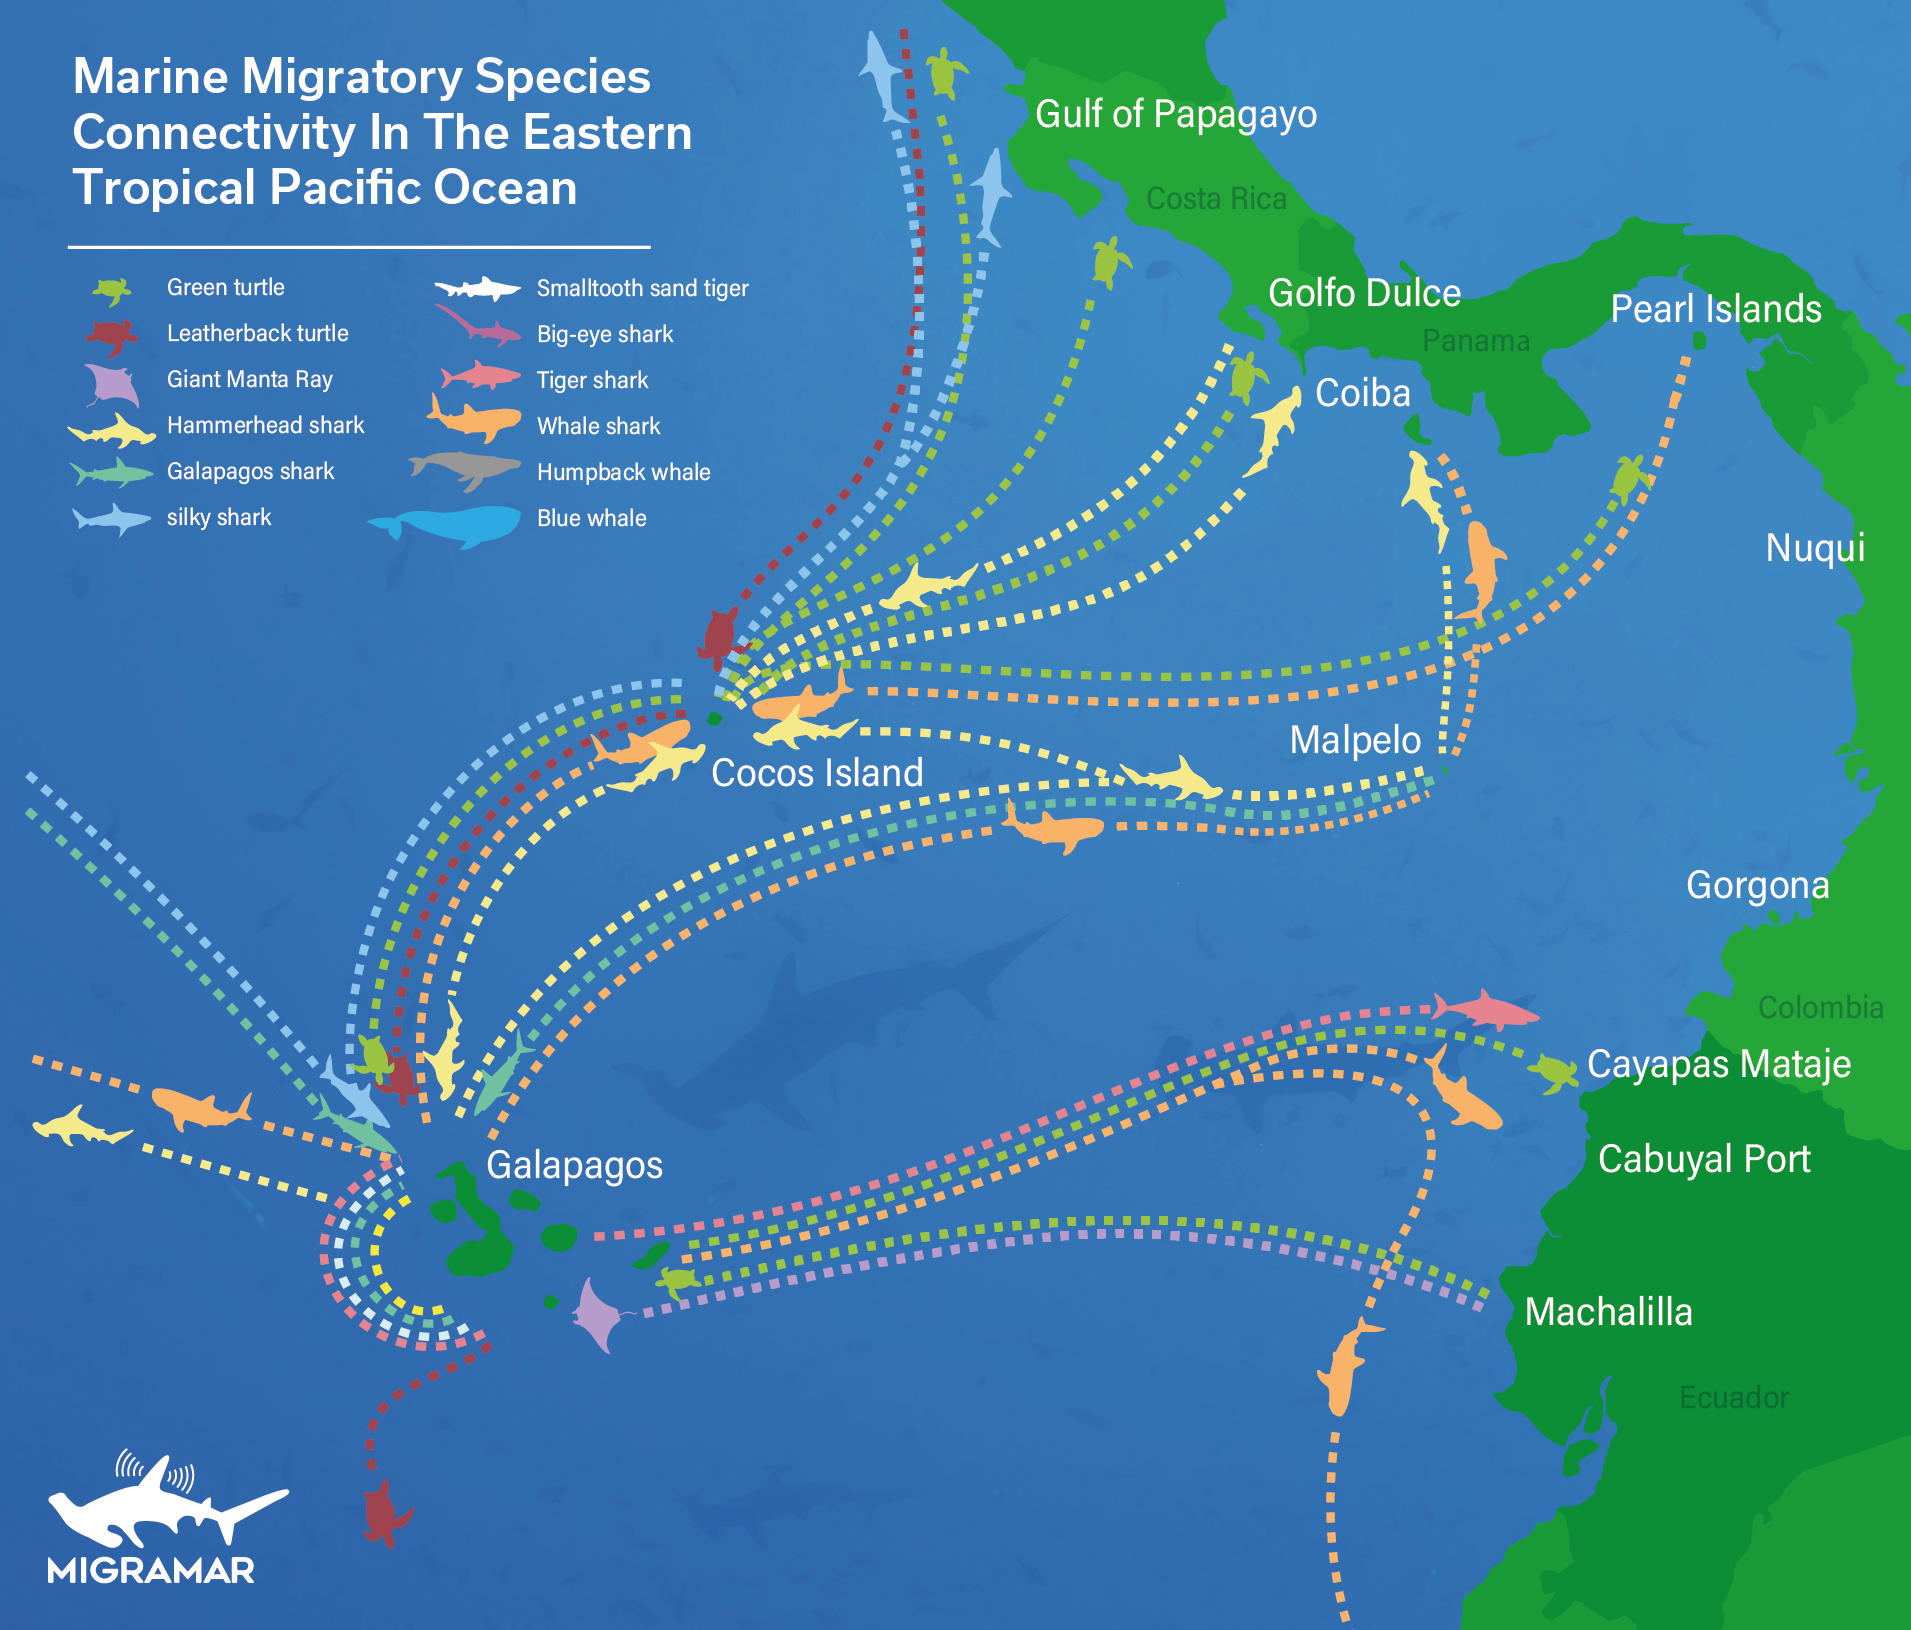 Environmental Groups Urge Costa Rica and Ecuador to Create World’s First Bilateral Marine Protected Area